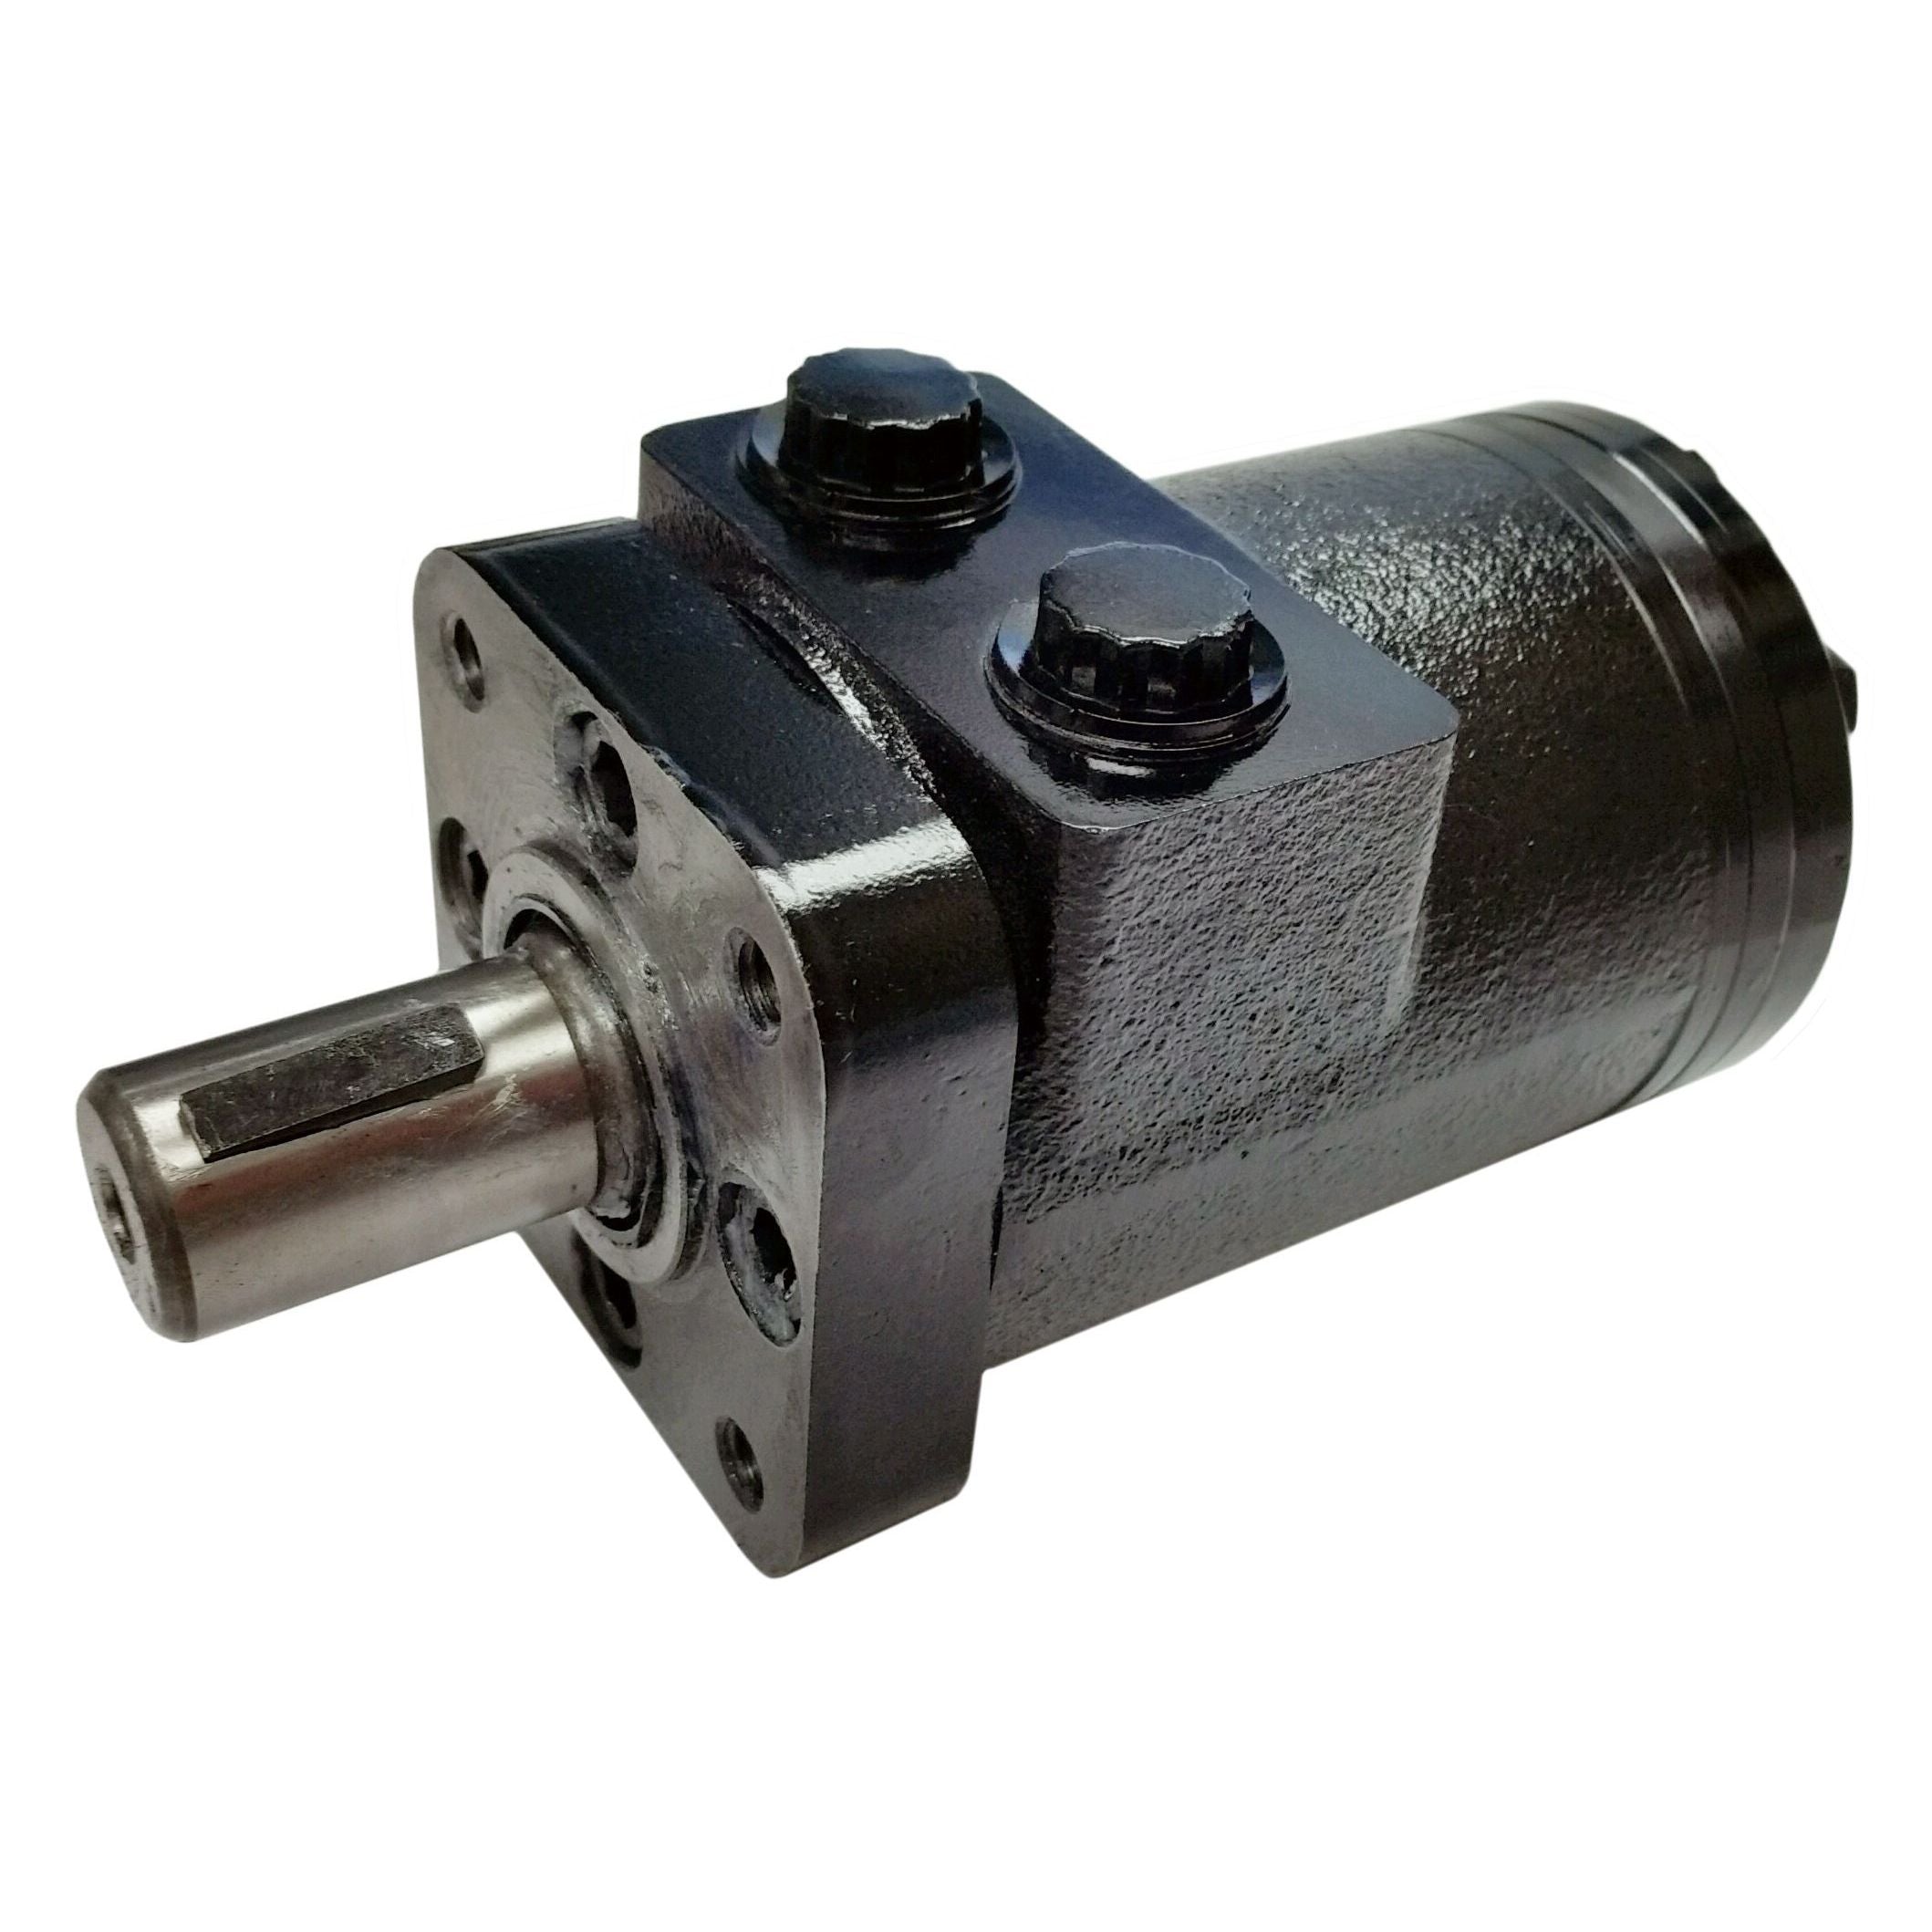 BMPH-160-H4-K-S : Dynamic LSHT Motor, 157cc, 383RPM, 2673in-lb, 2031psi Differential, 15.85GPM, SAE A 4-Bolt Mount, 1" Bore x 1/4" Key Shaft, Side Ported, #10 SAE (5/8")